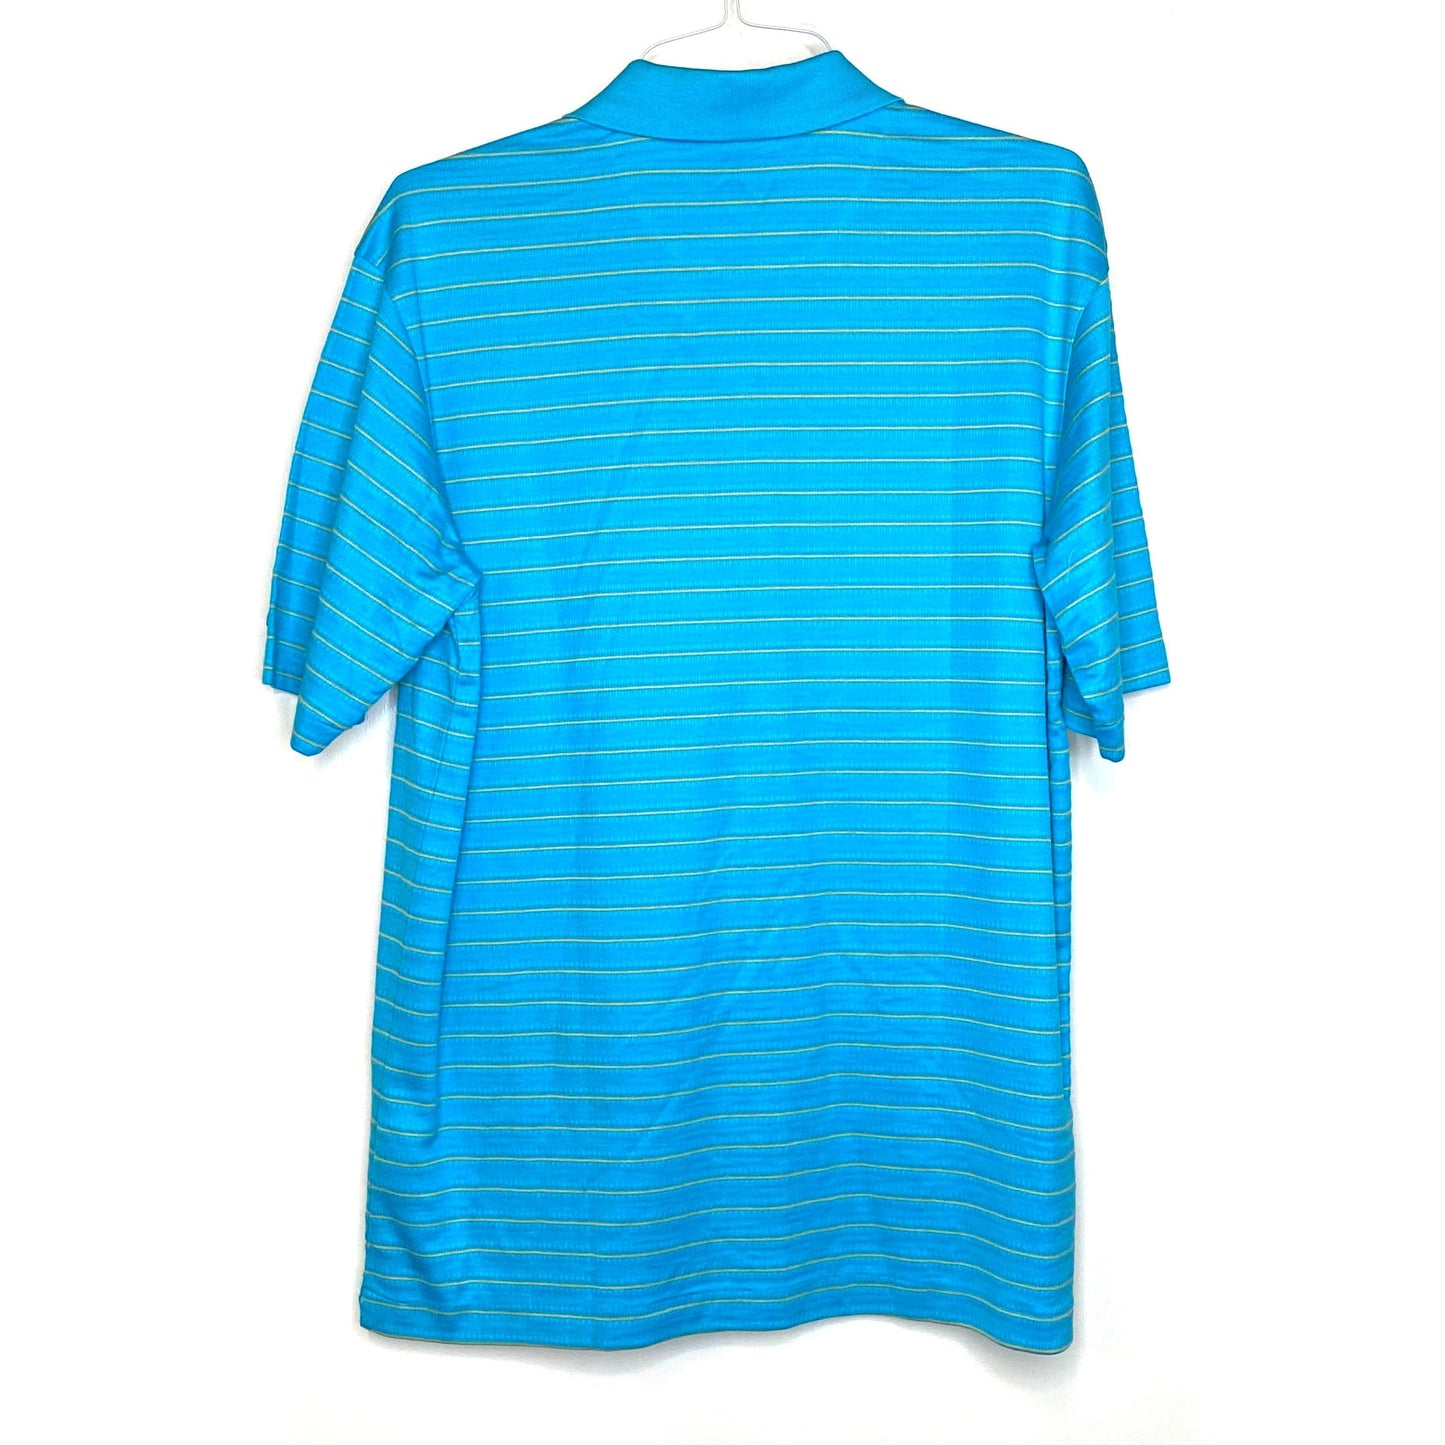 Tiger Woods Collection Nike Mens Size M Blue Stiped Polo Golf Shirt Fit Dry S/s